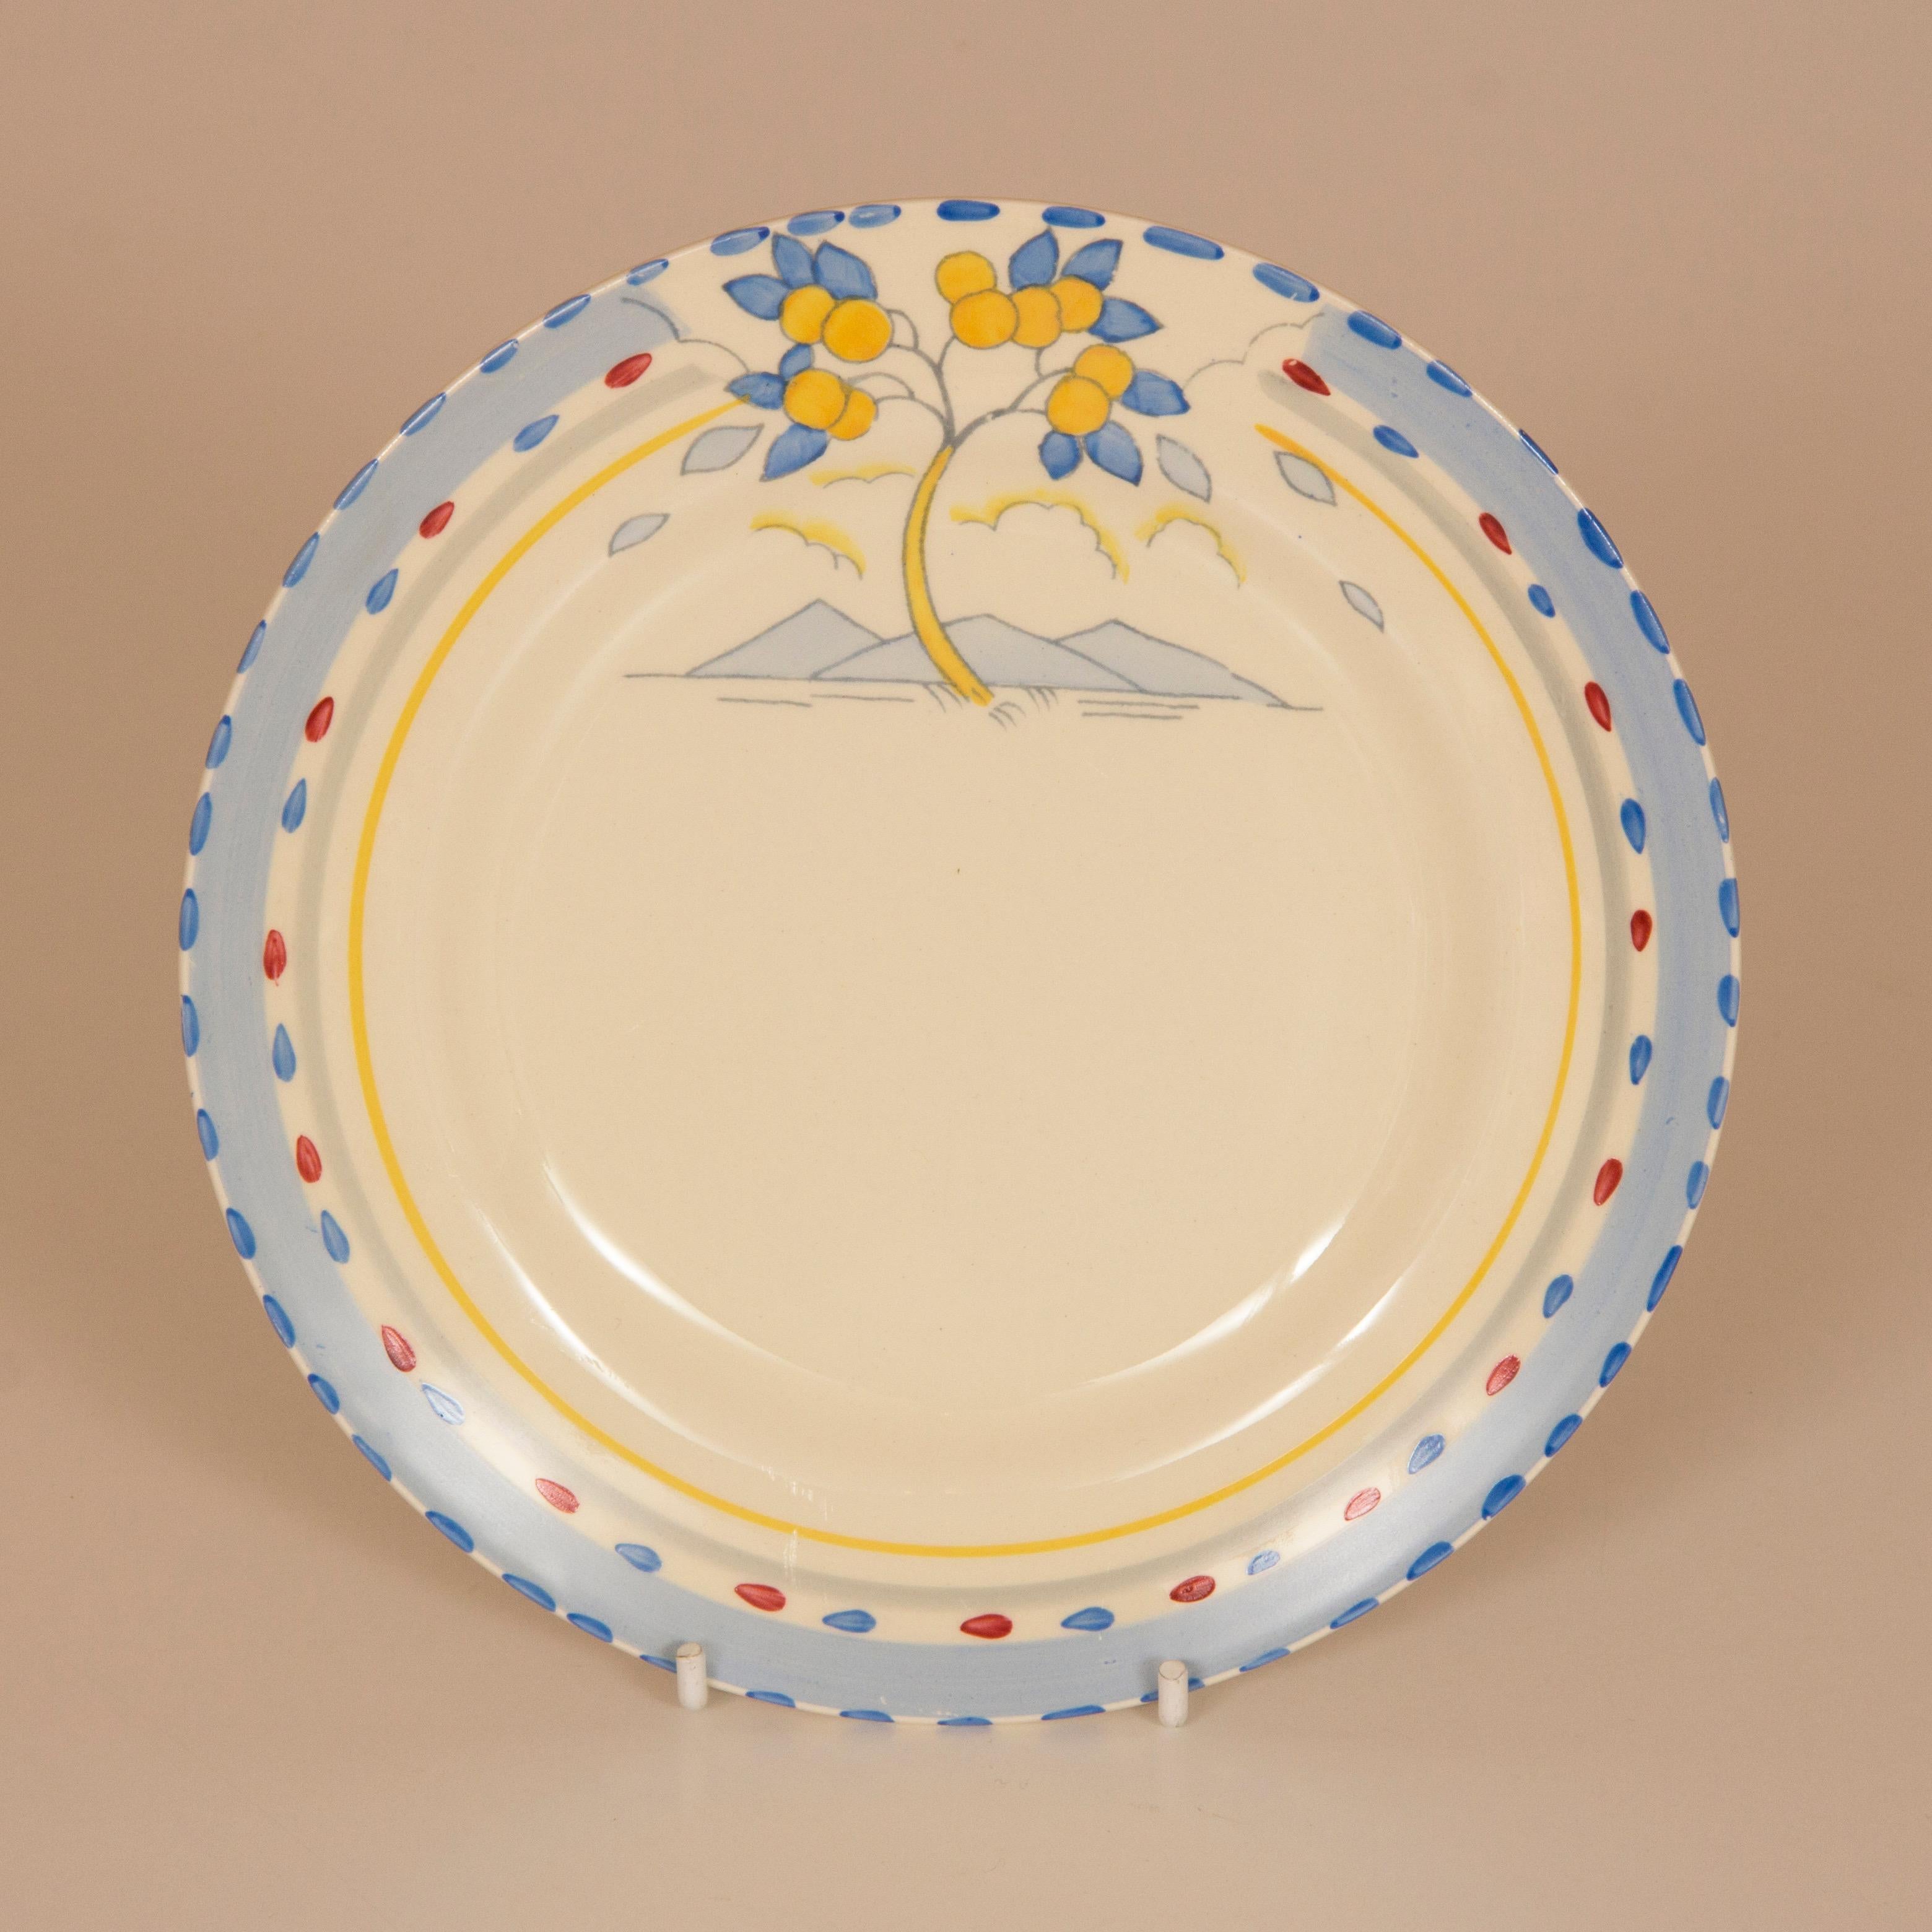 British Art Deco Tea and Dinner Service by Burleigh Ware